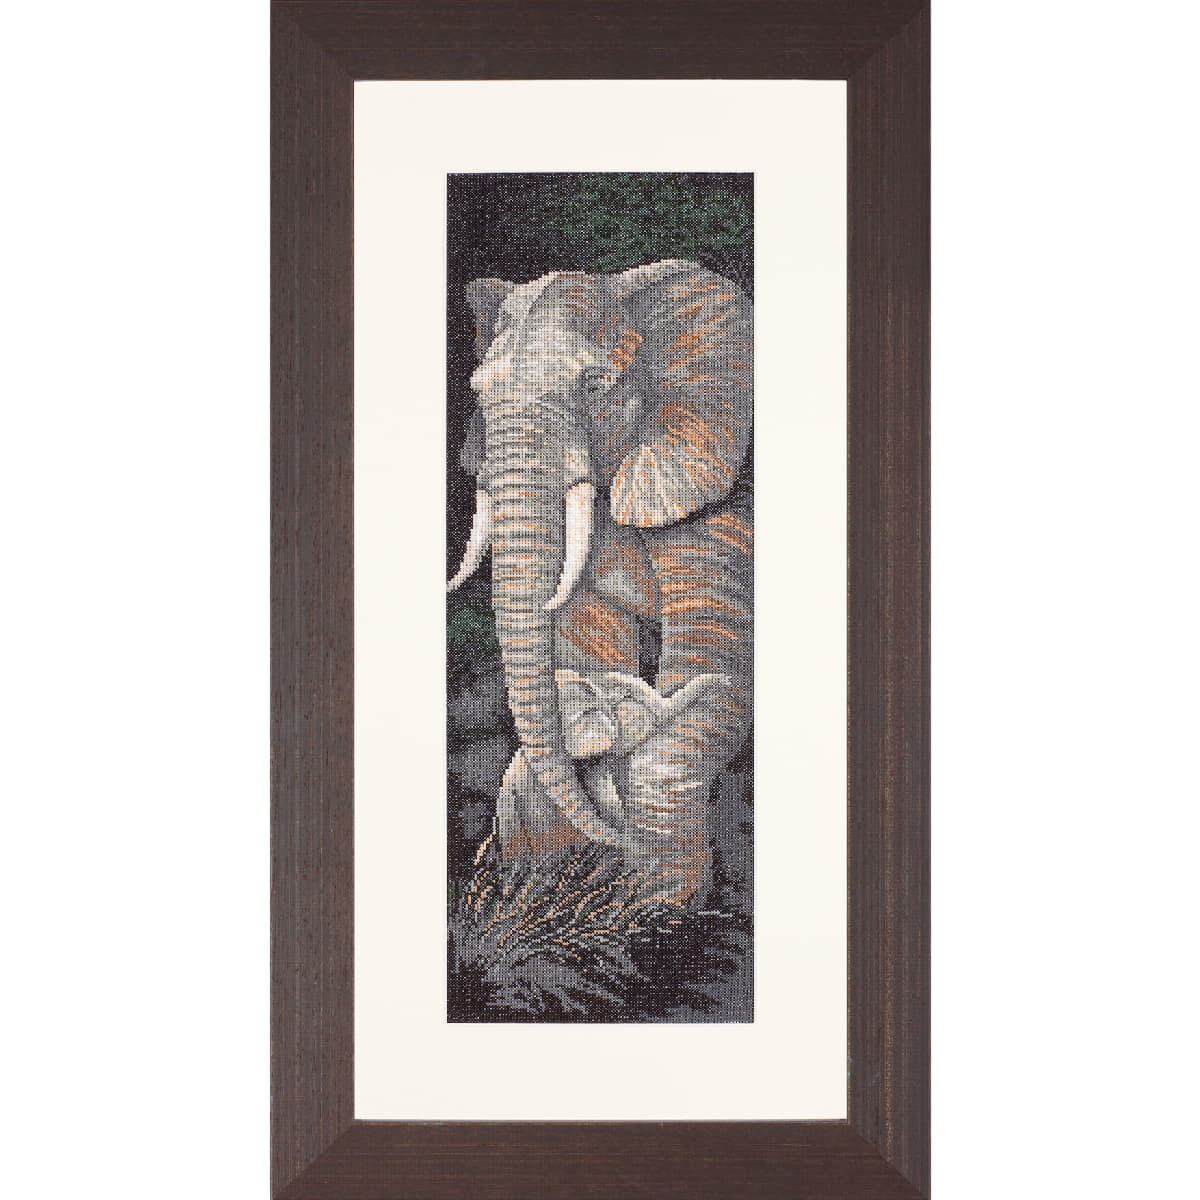 Framed artwork showing a close-up of an adult elephant...